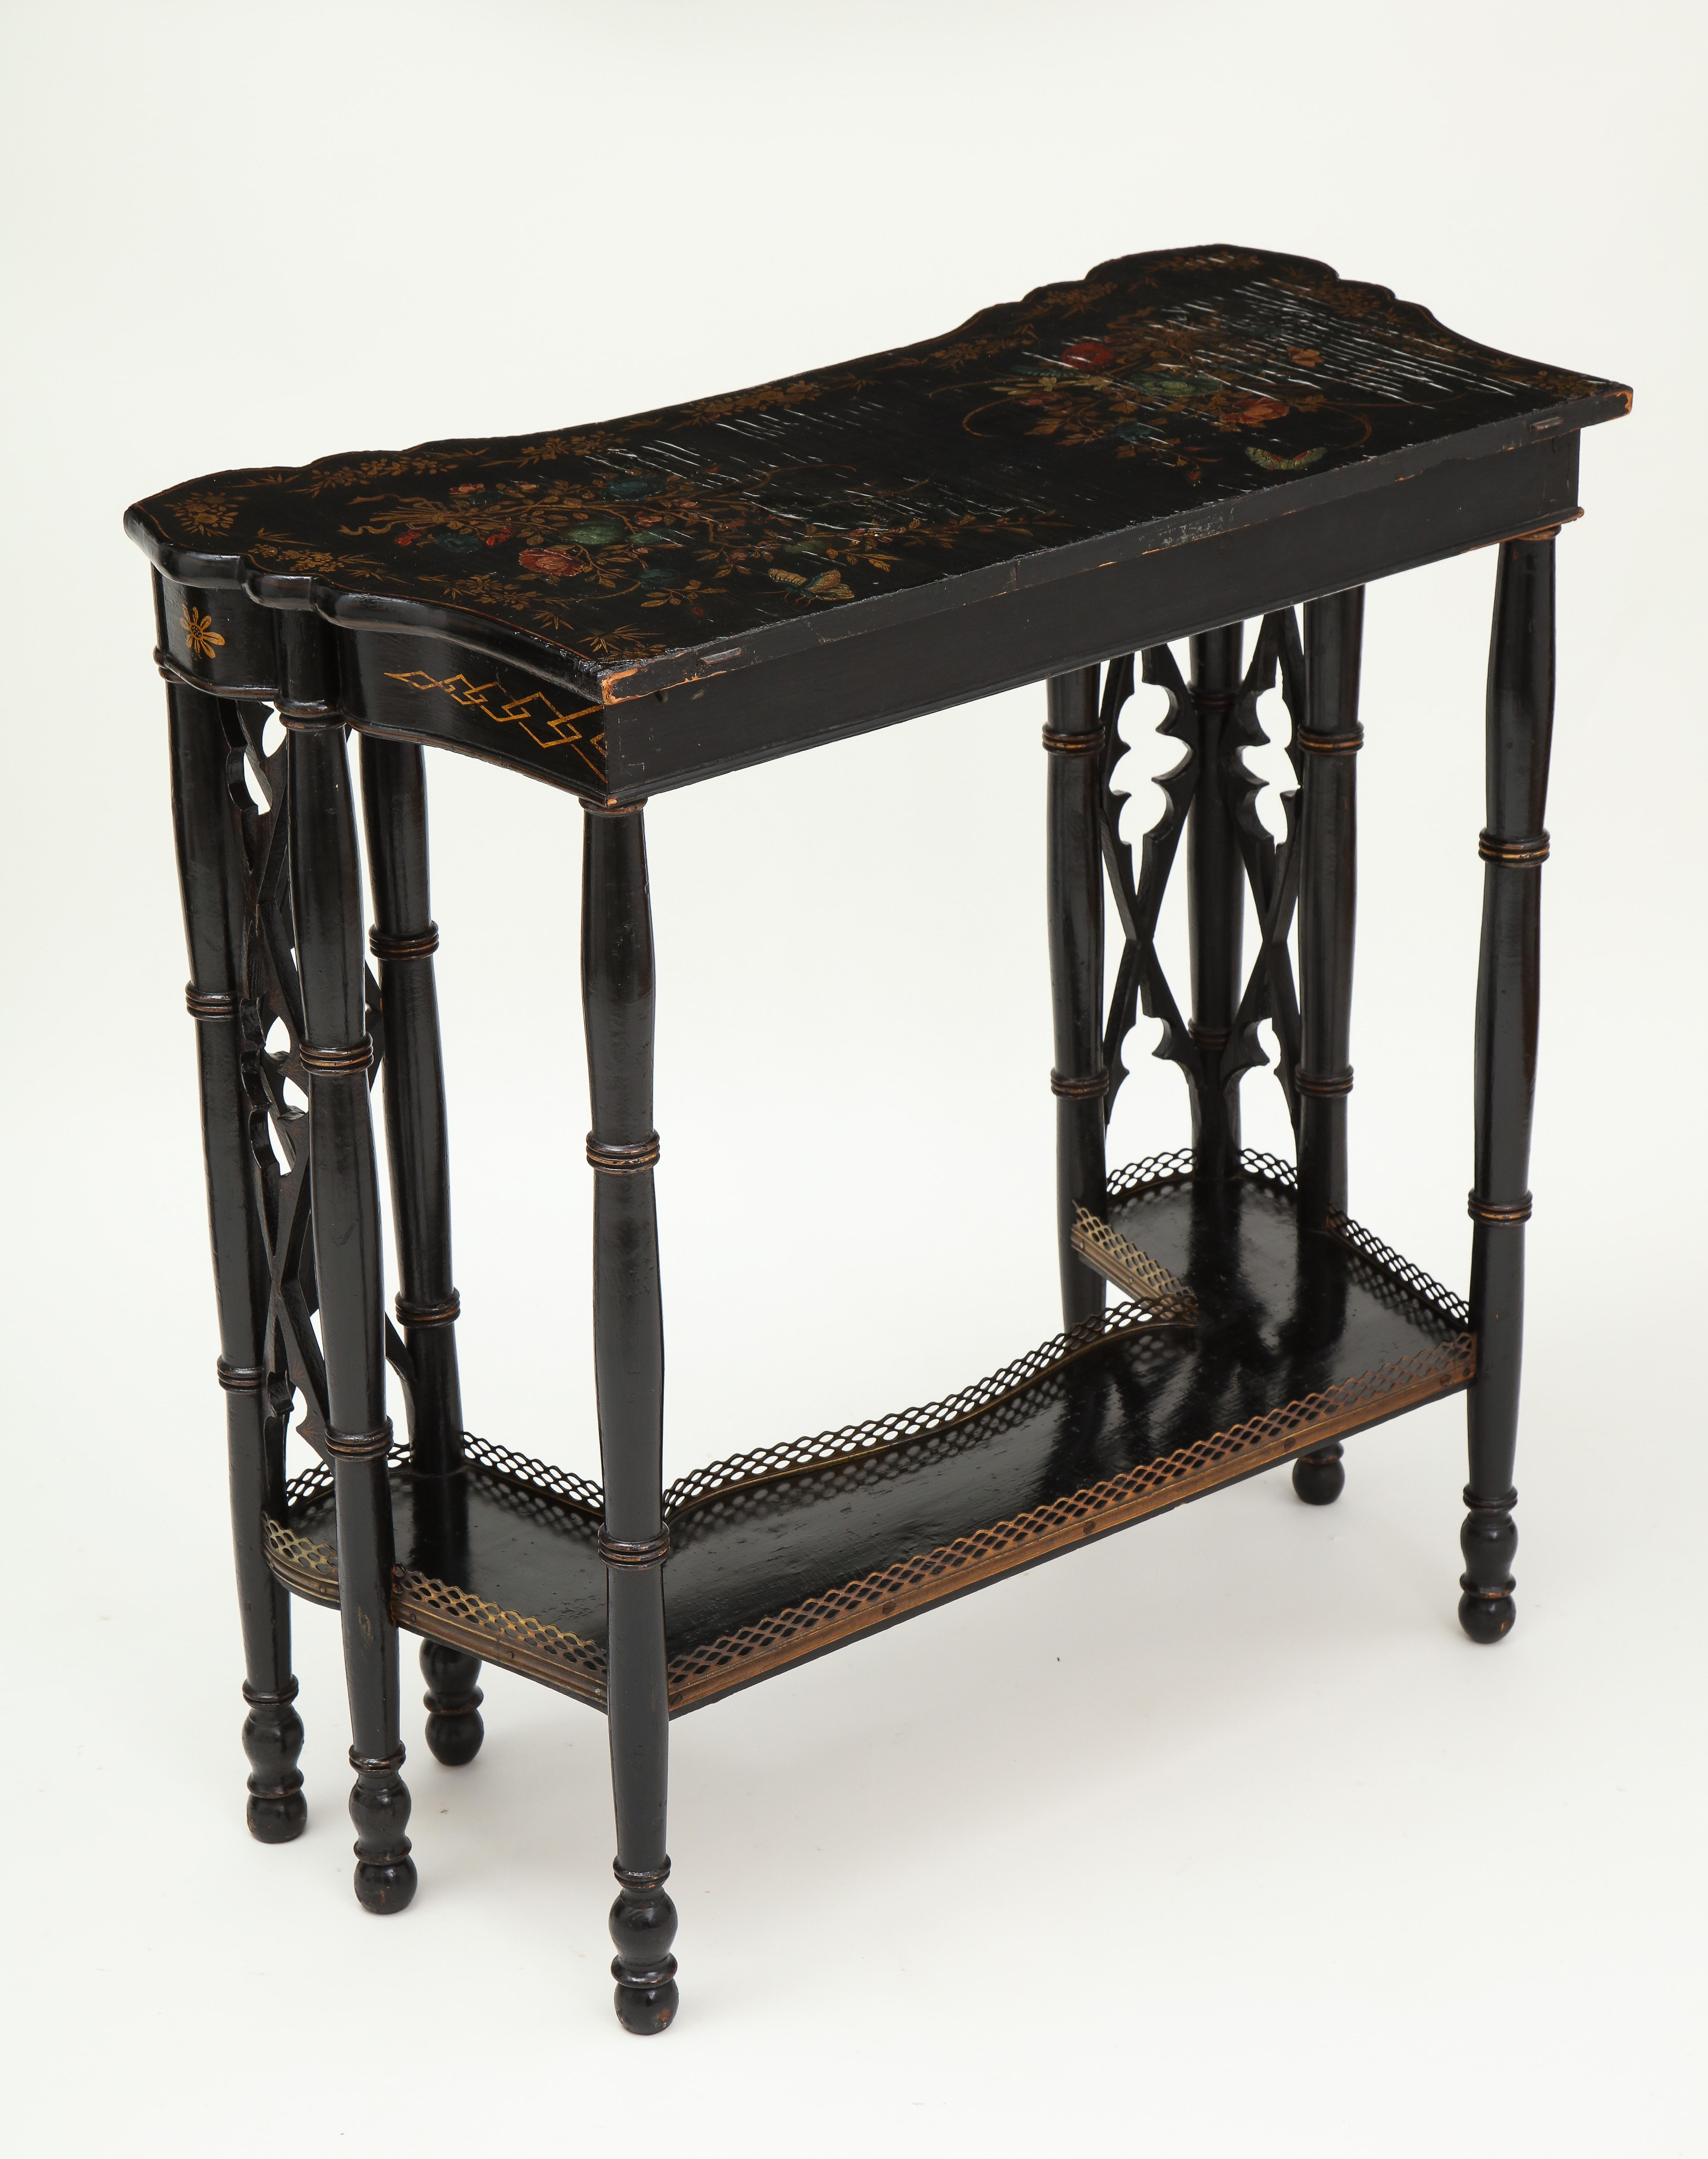 Japanned Pair of Fine Regency Black Painted and Chinese Lacquer Side Tables